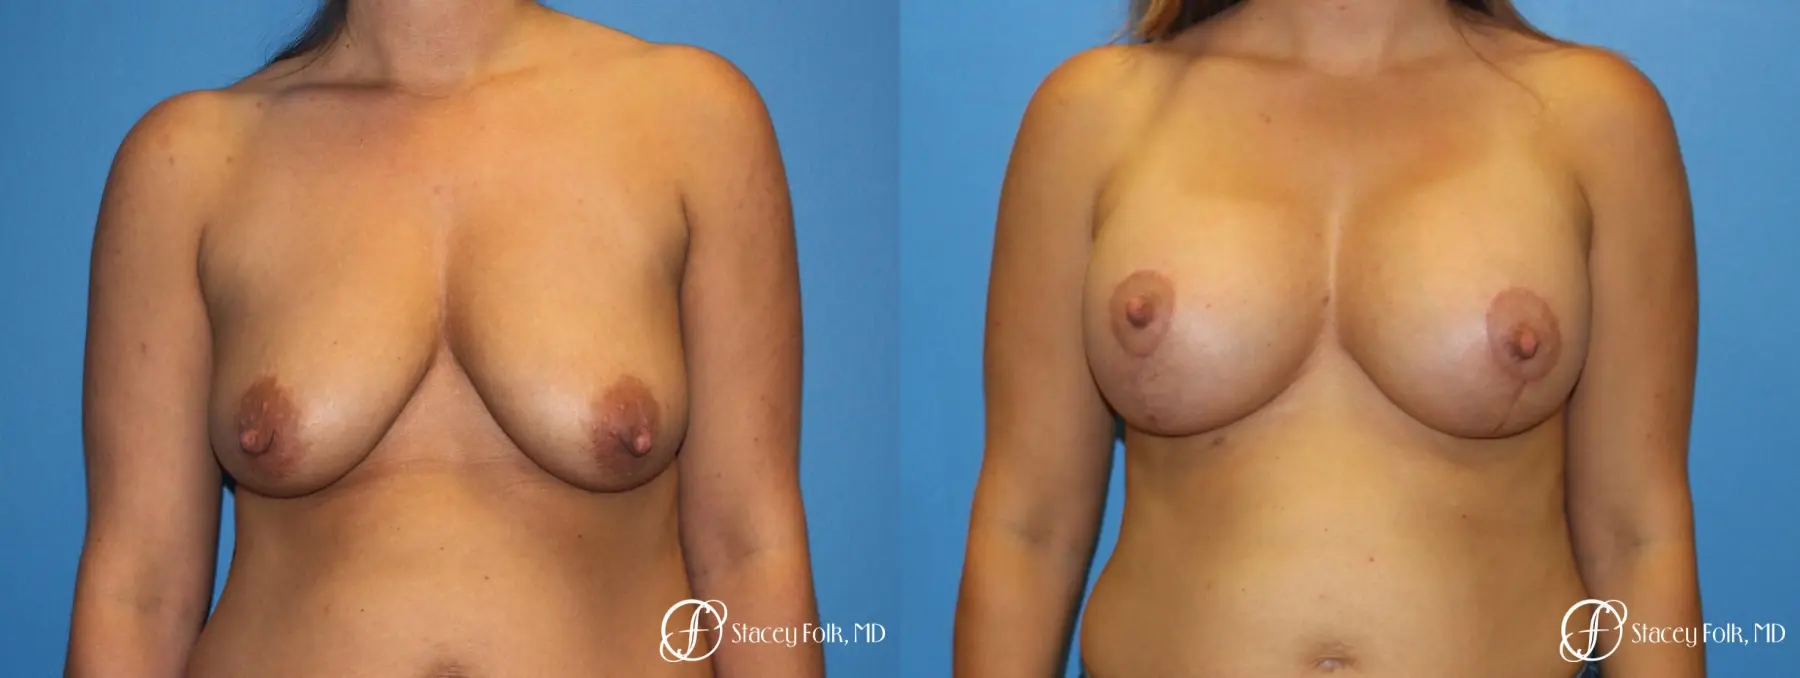 Denver Breast Lift and Augmentation 8629 - Before and After 1